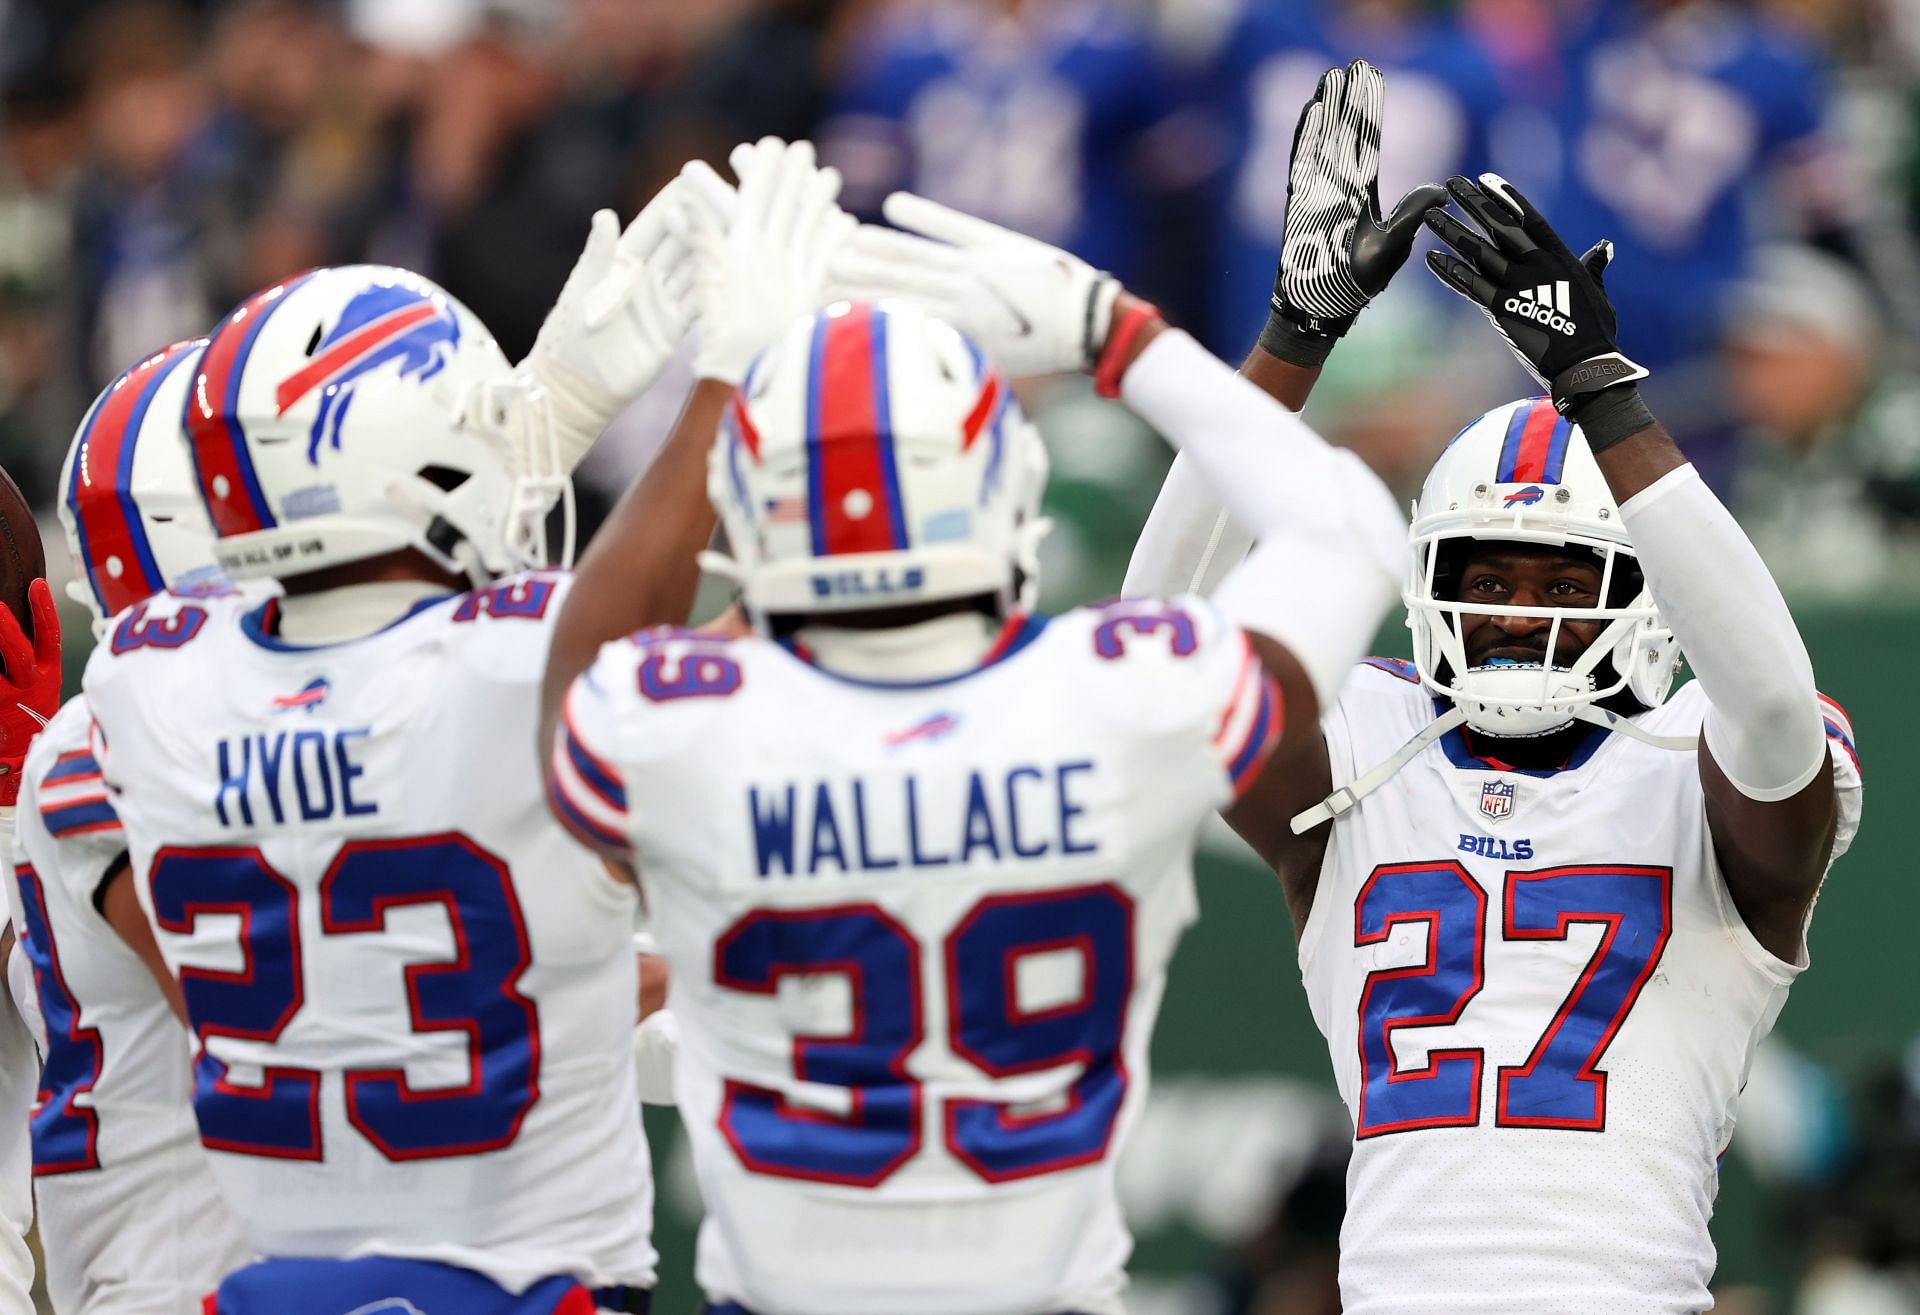 Hyde, Wallace, and others preparing for Buffalo Bills v New York Jets